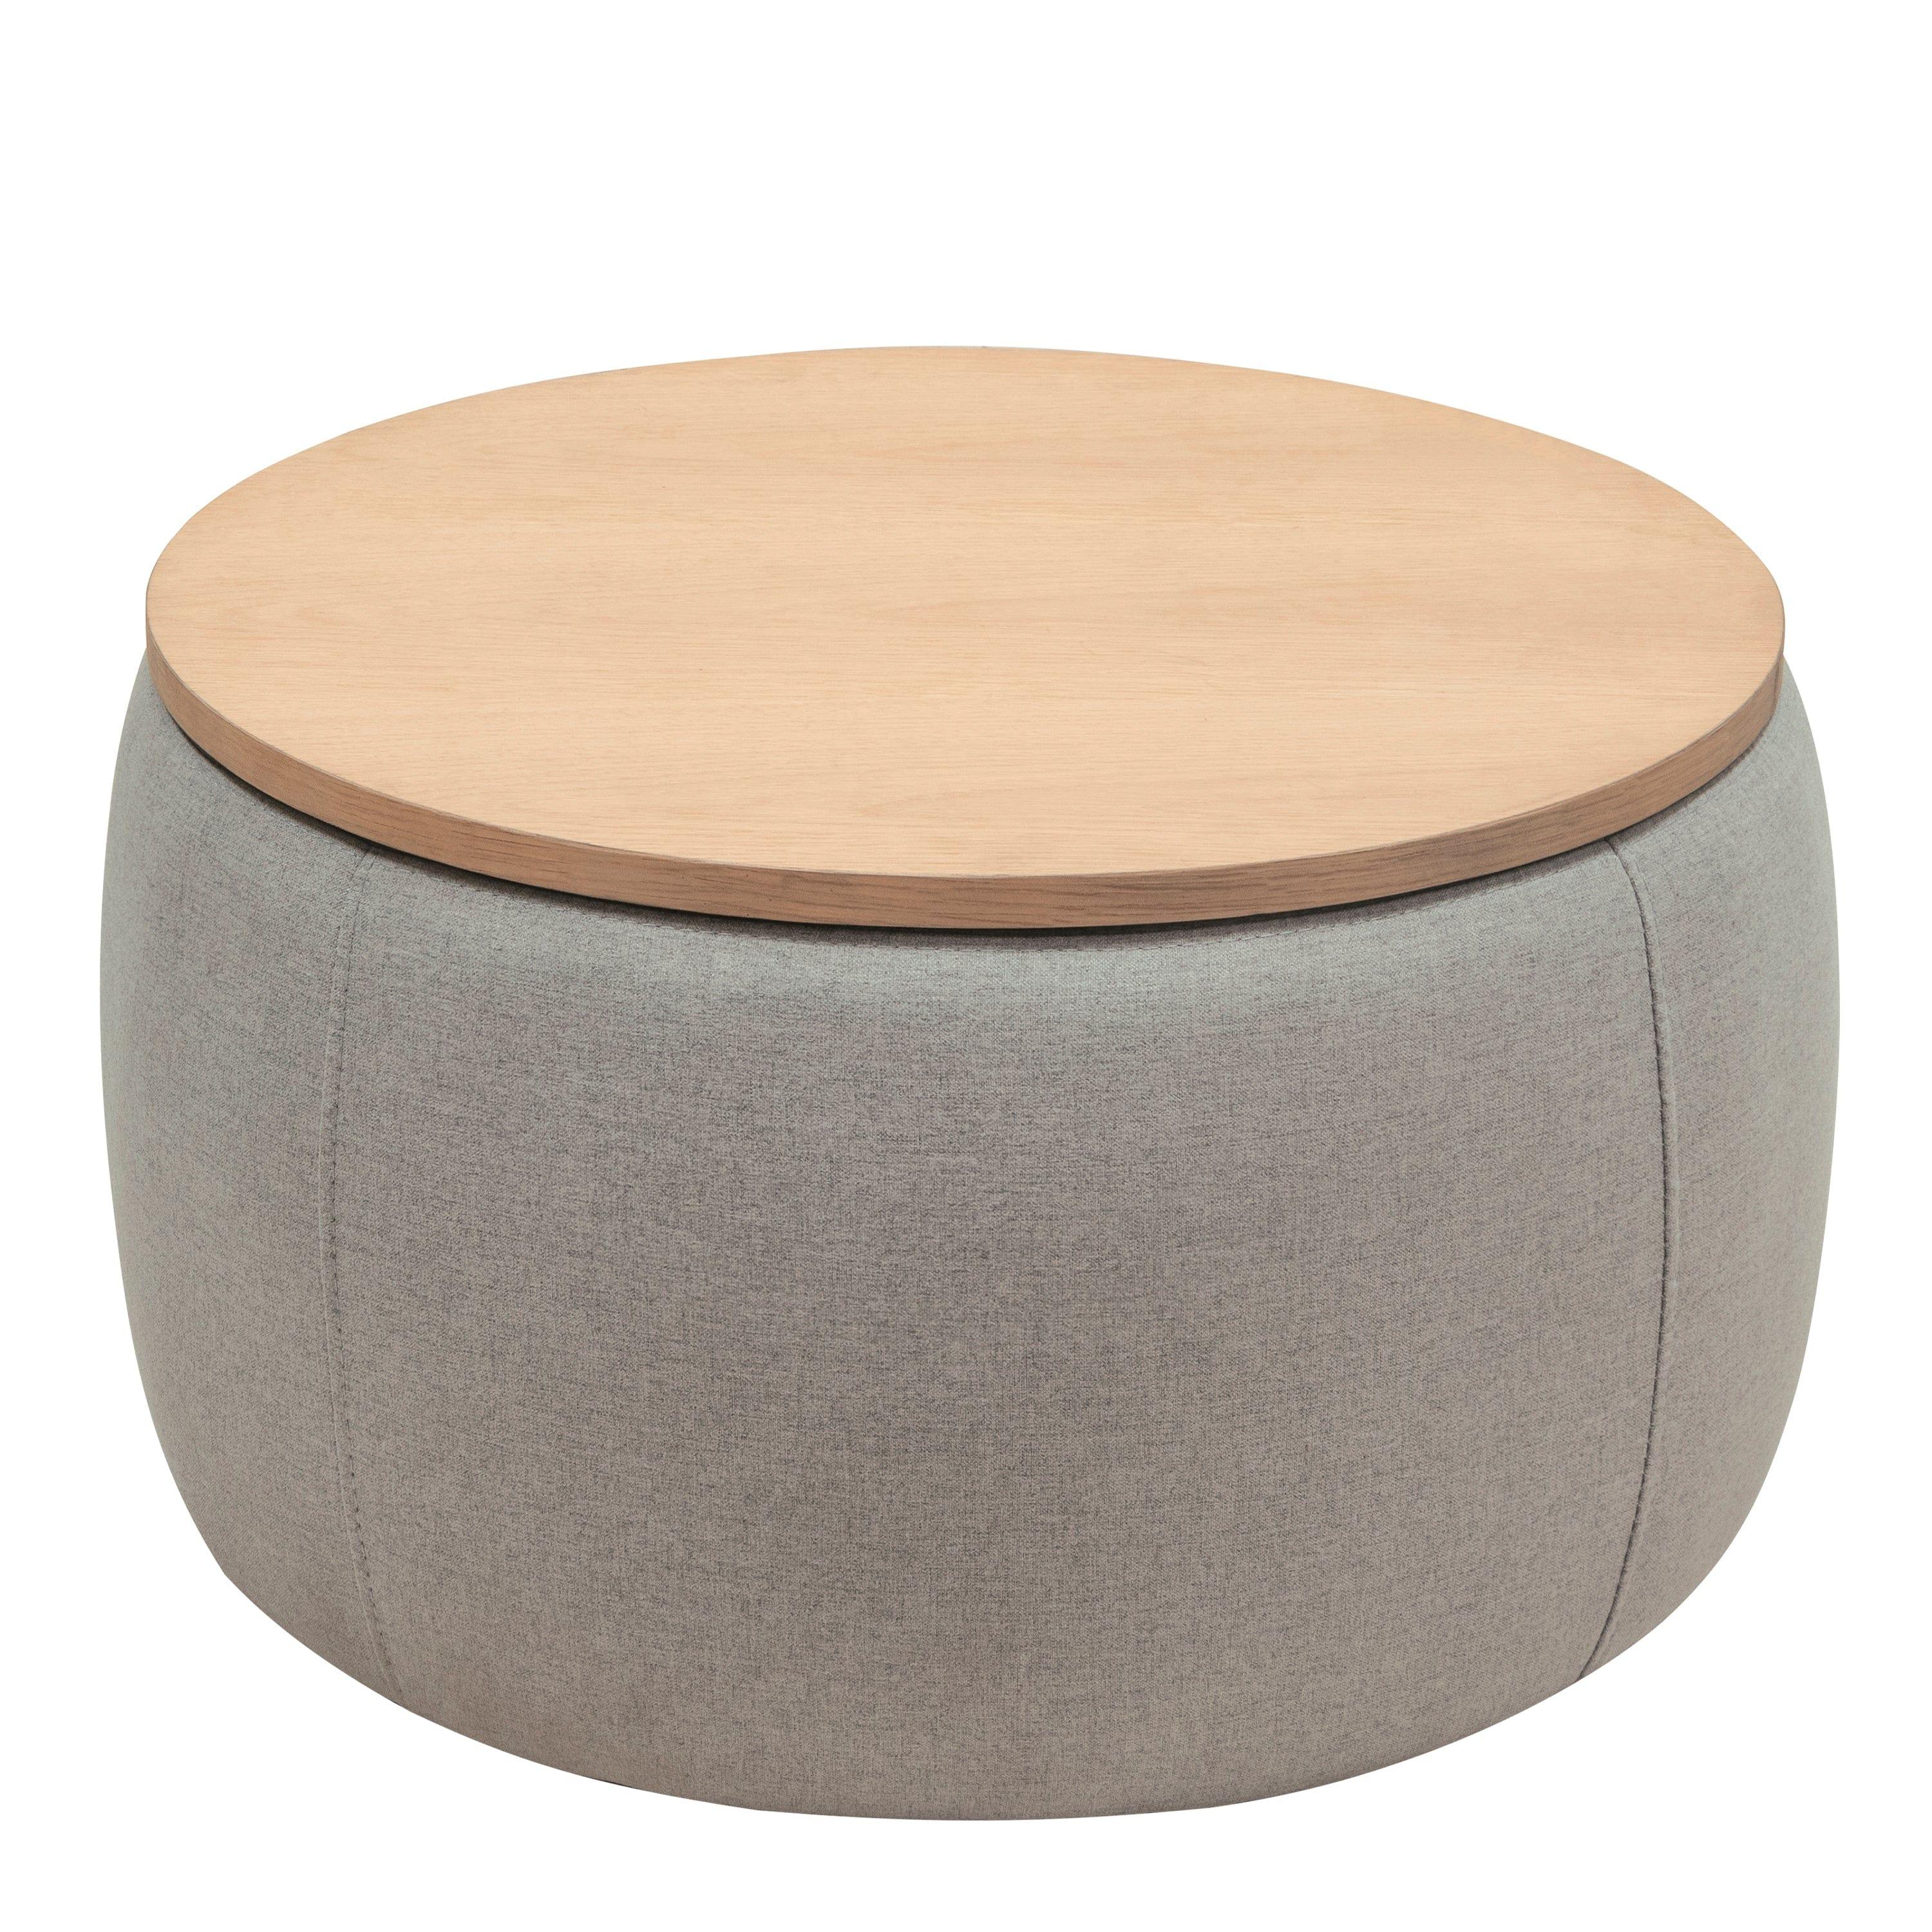 Shop Round Storage Ottoman, 2 in 1 Function, Work as End table and Ottoman,  Grey (25.5"x25.5"x14.5") Mademoiselle Home Decor